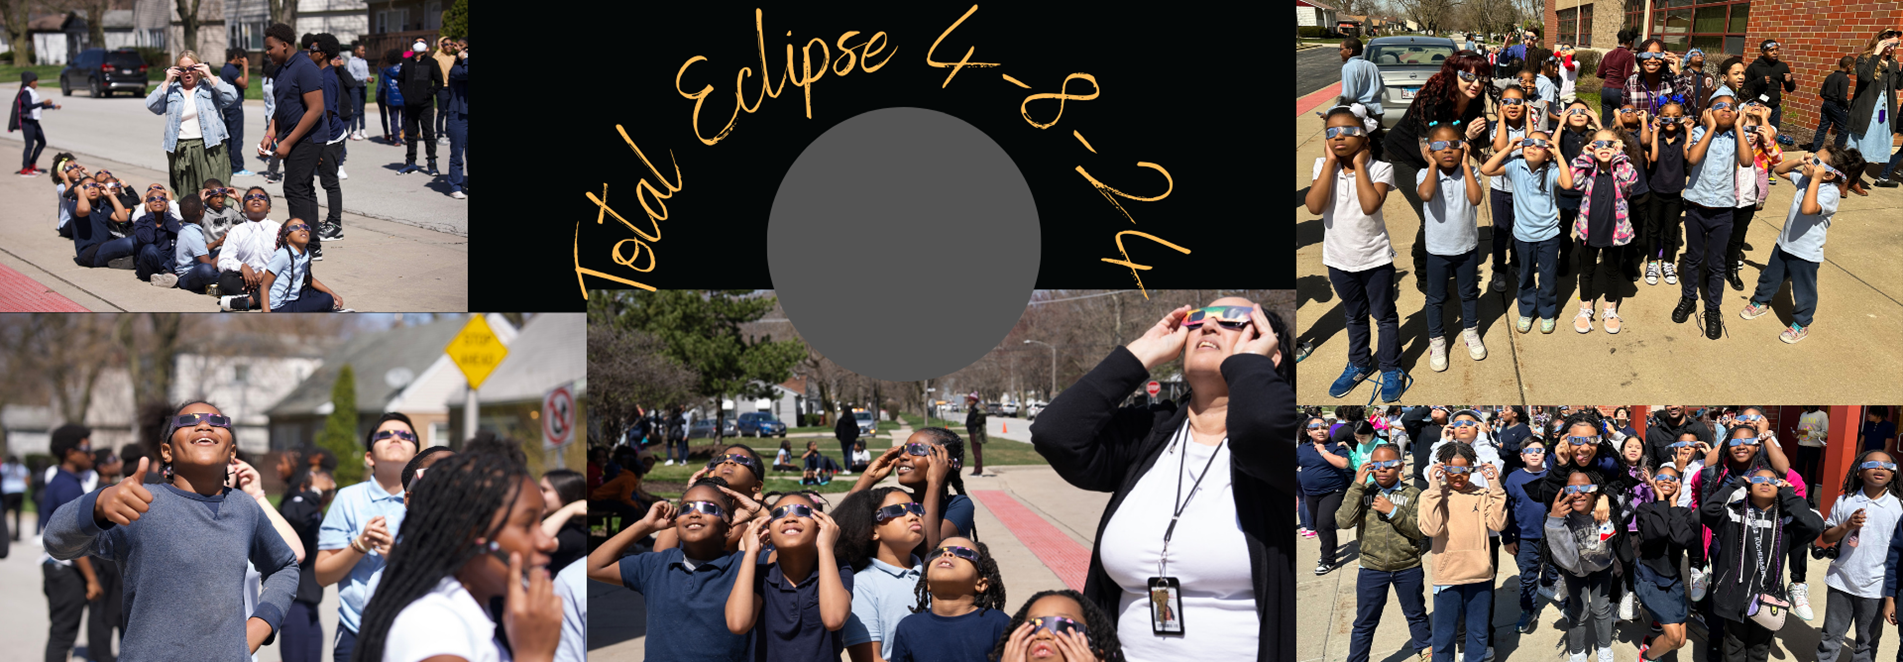 Students and staff view total eclipse, many for the first time.